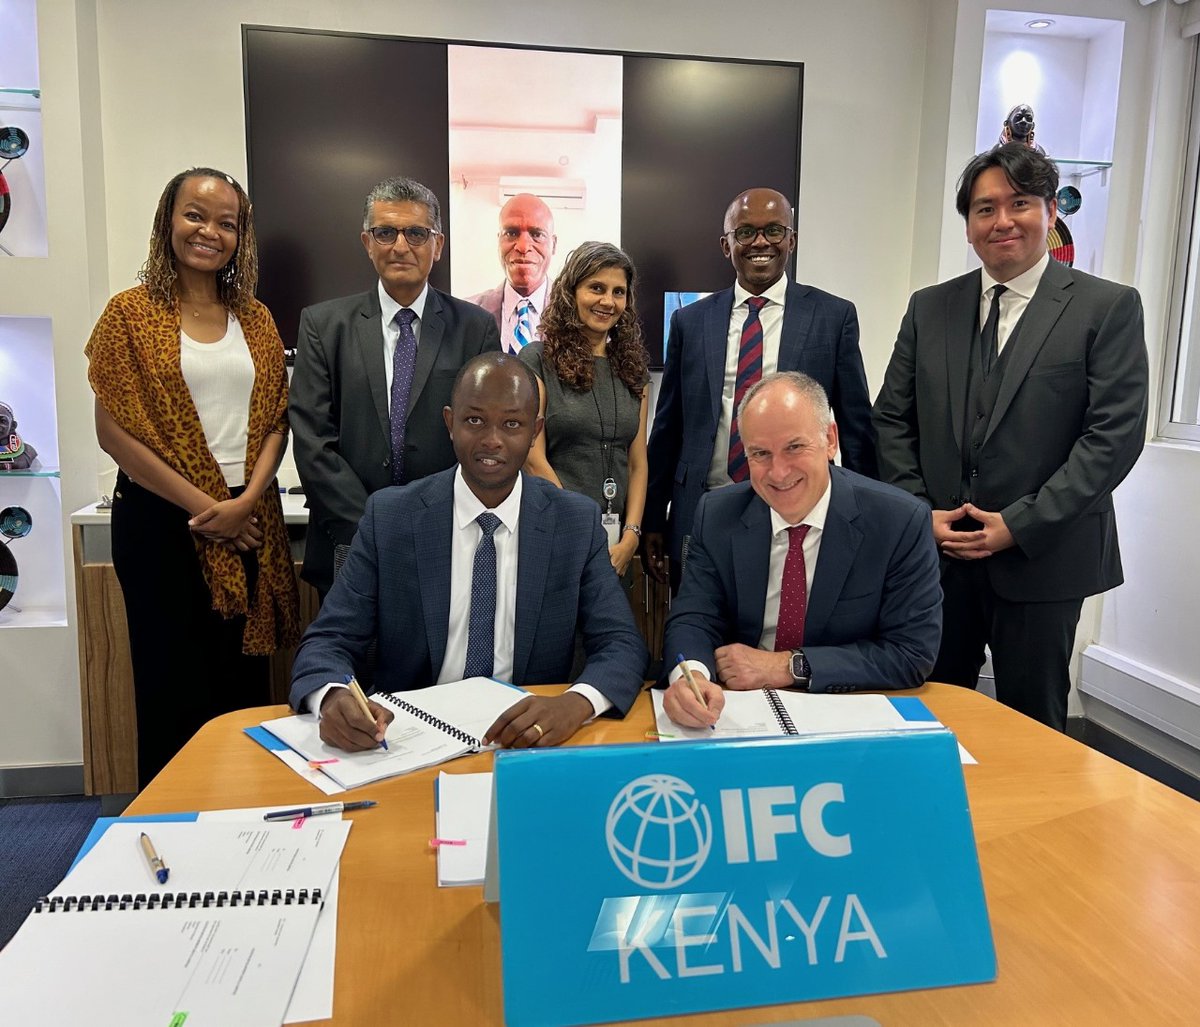 We've officially sealed a $20M long-term financing deal with @IFC_org. The agreement was signed by Ken Mbae, Centum RE MD, and Henrick Pedersen, IFC Regional Director. We are immensely grateful for the incredible support from @MworiaJ and the entire team as we cap off the year…